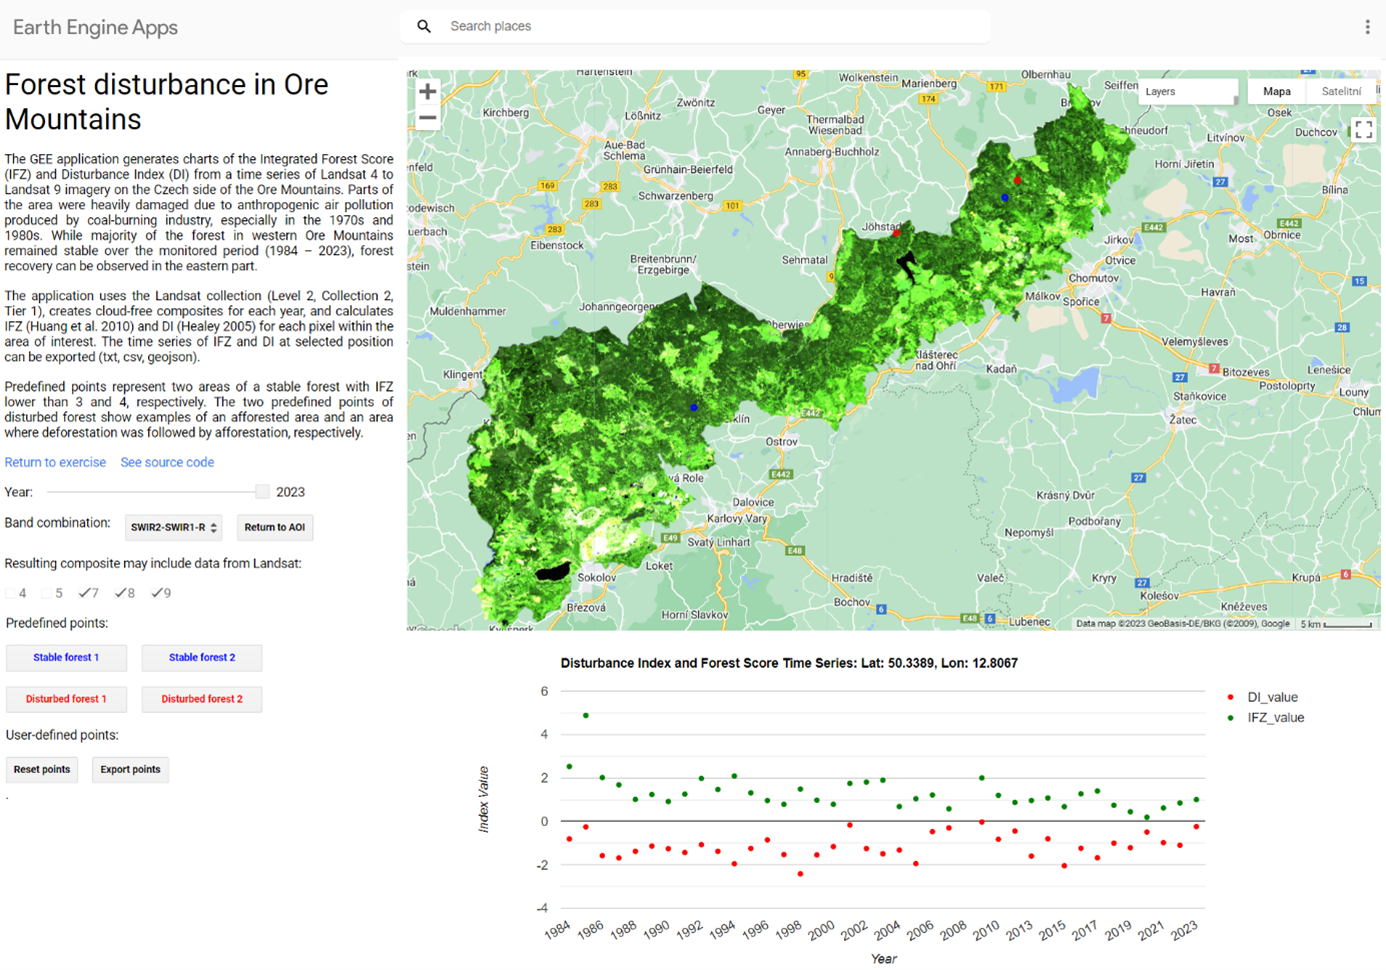 The GEE application Forest disturbance in Ore Mountains.